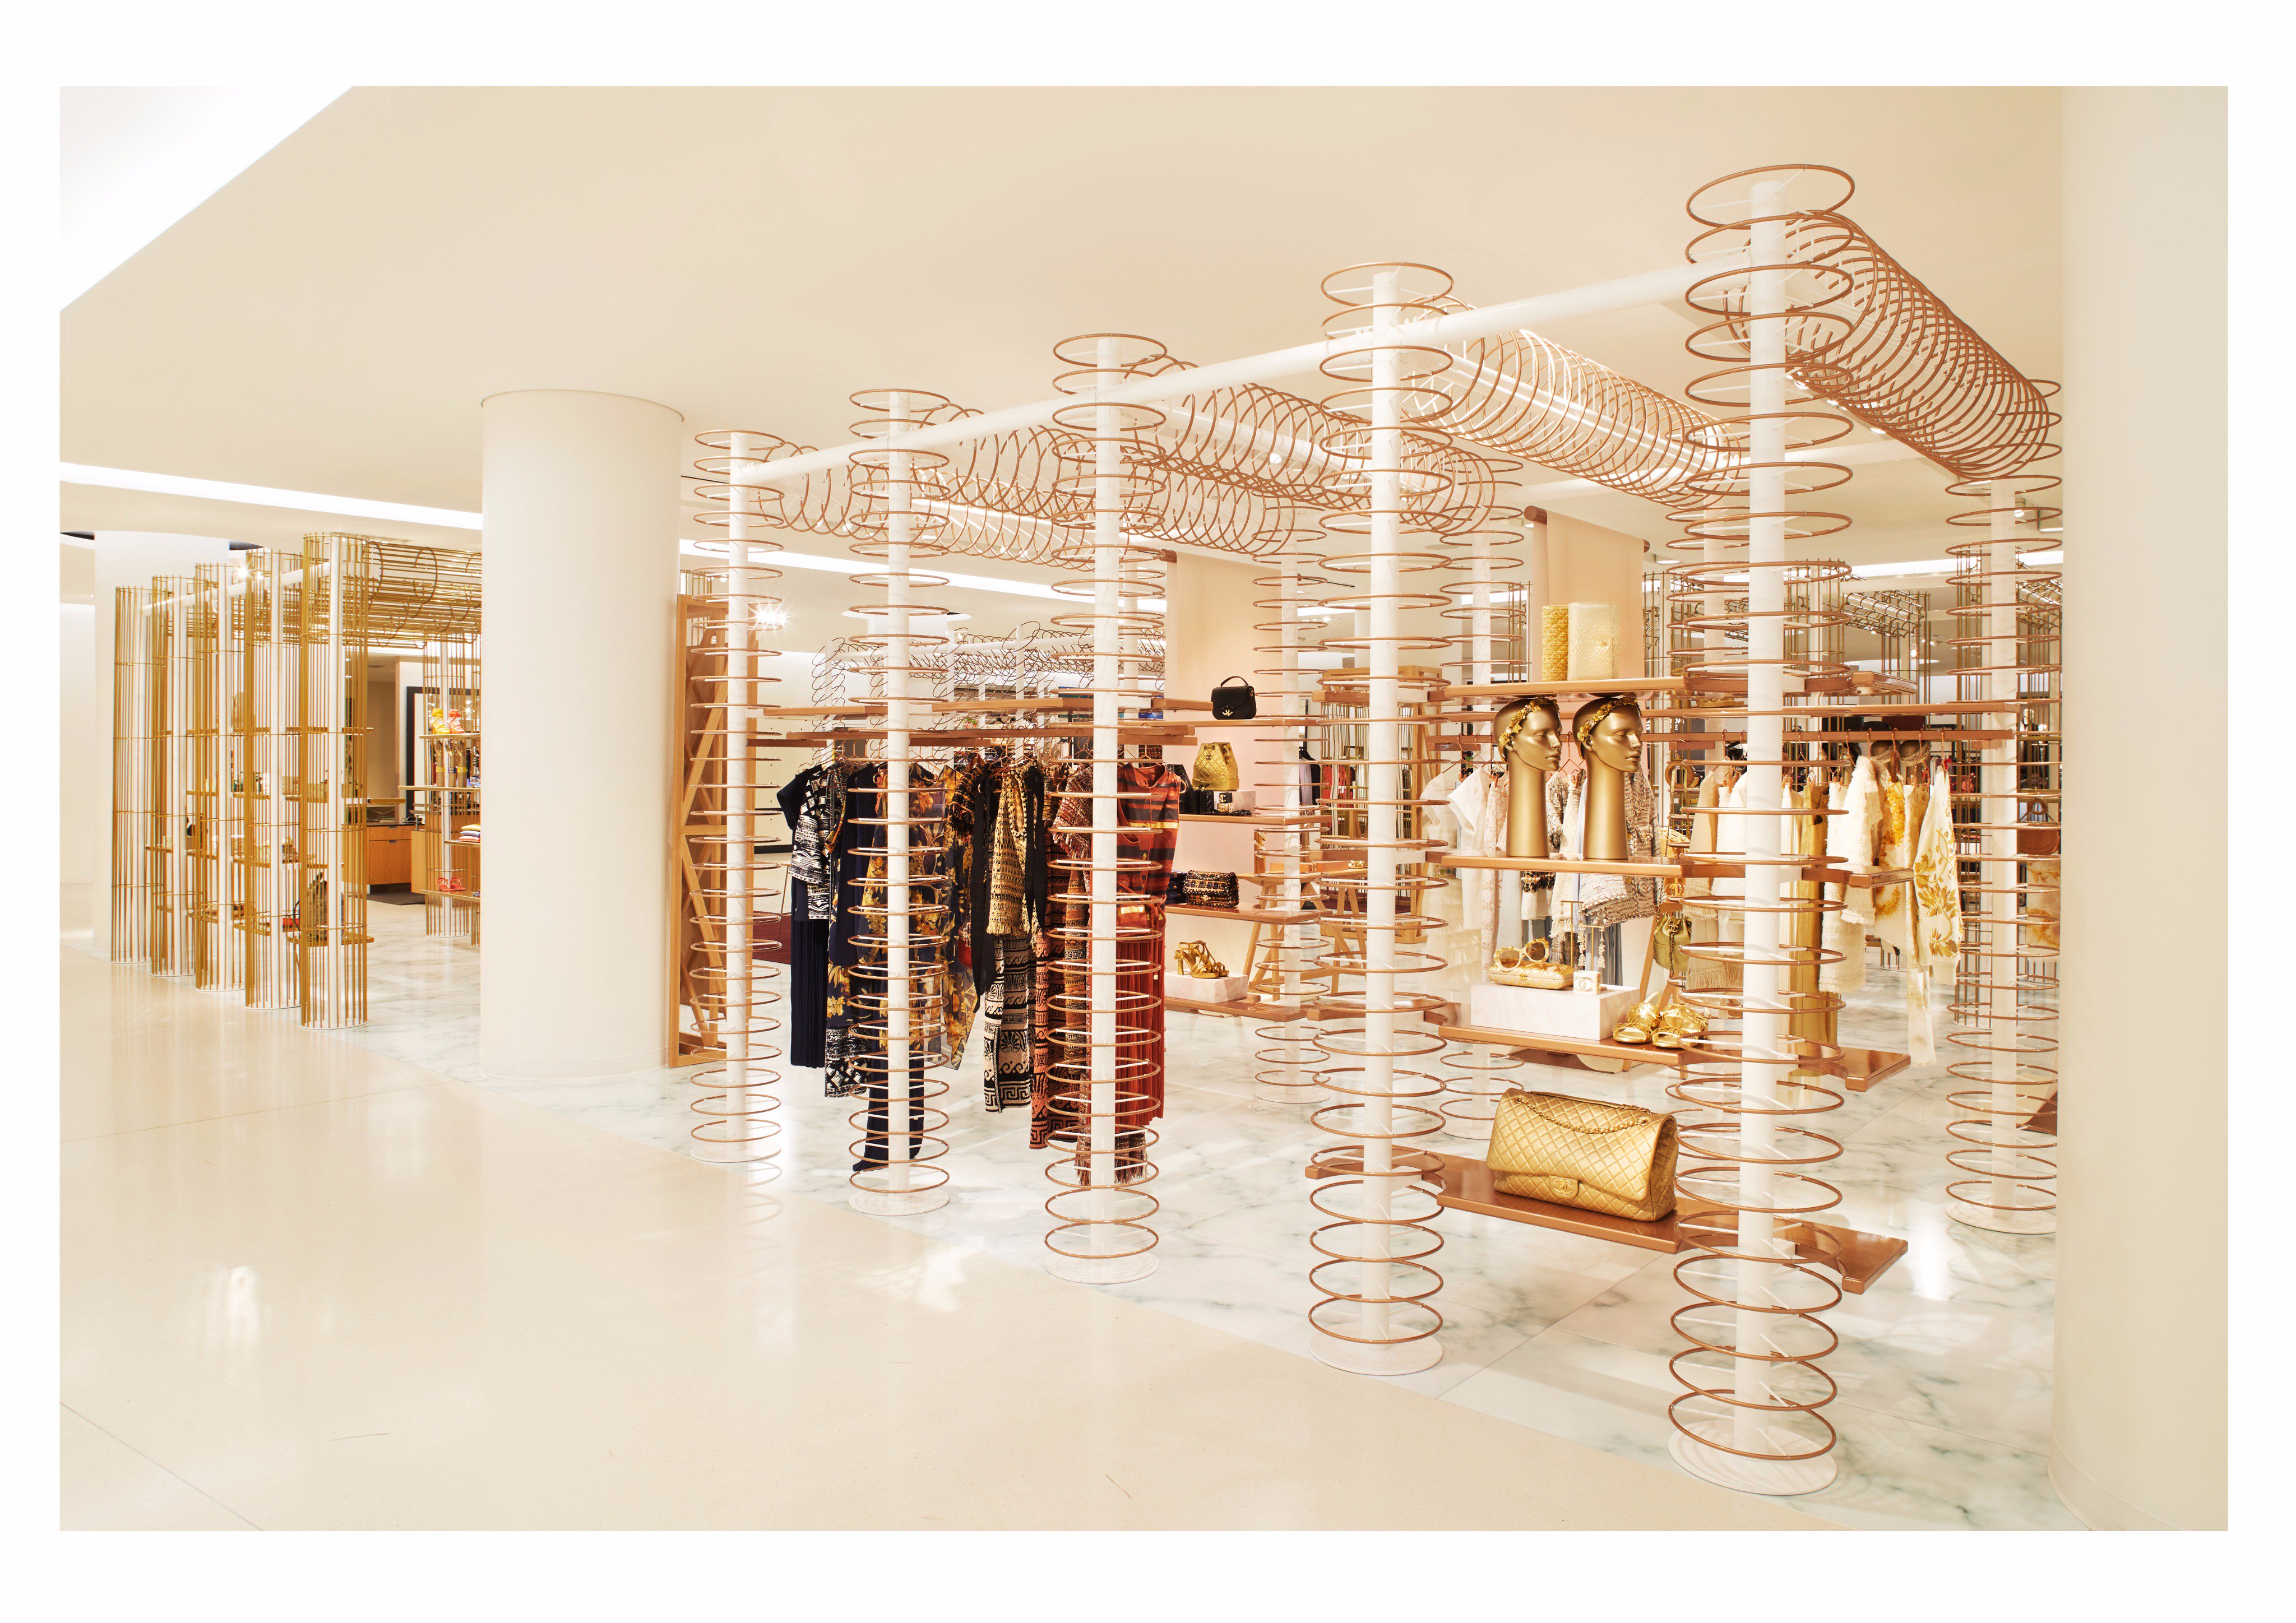 Nordstrom on X: We've partnered with @CHANEL to bring an exclusive CHANEL  x Nordstrom Ephemeral Boutique to our #Seattle Flagship. Open to the public  Nov 29 - Dec 10, the boutique features